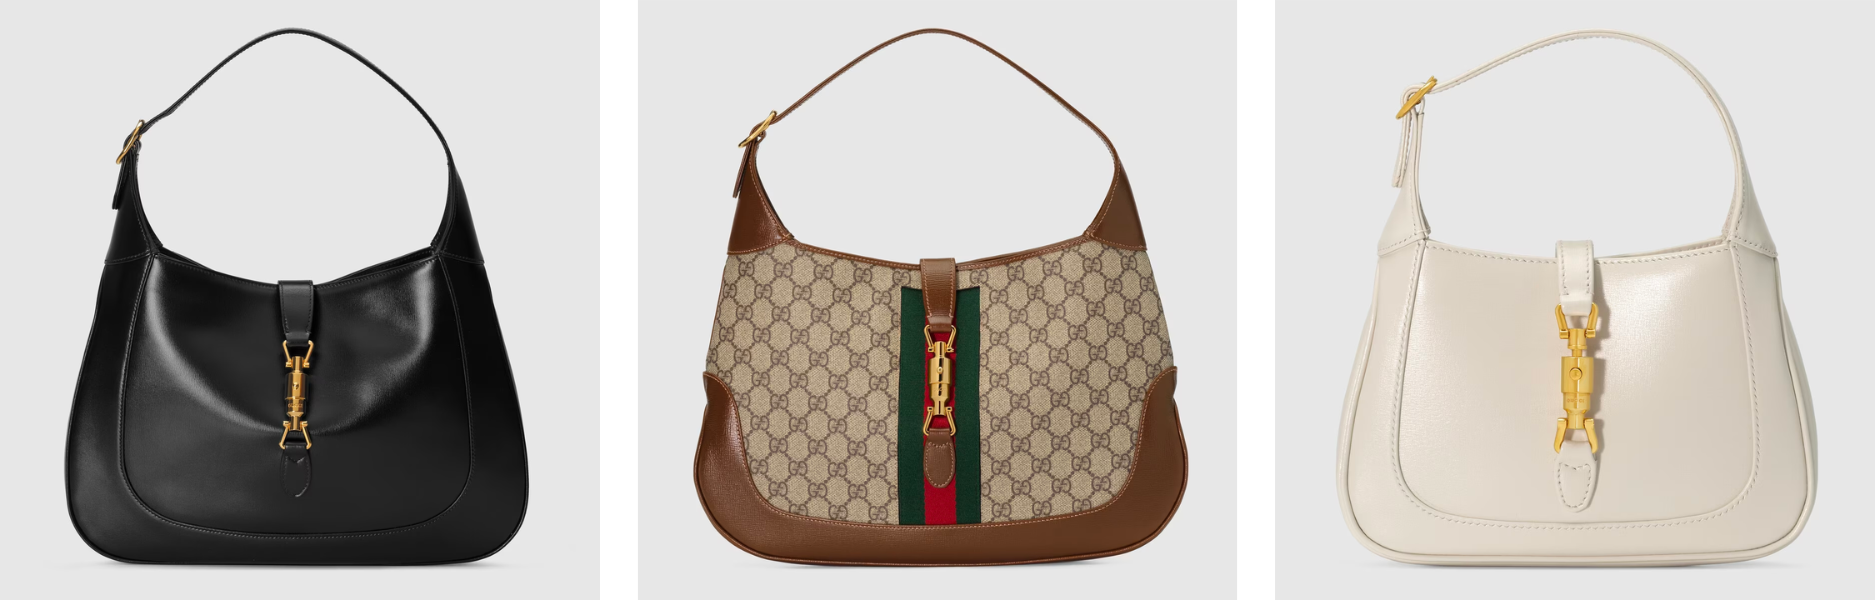 Gucci Jackie Bags  Gucci jackie bag, Gucci vintage bag, Gucci bag outfit  street styles